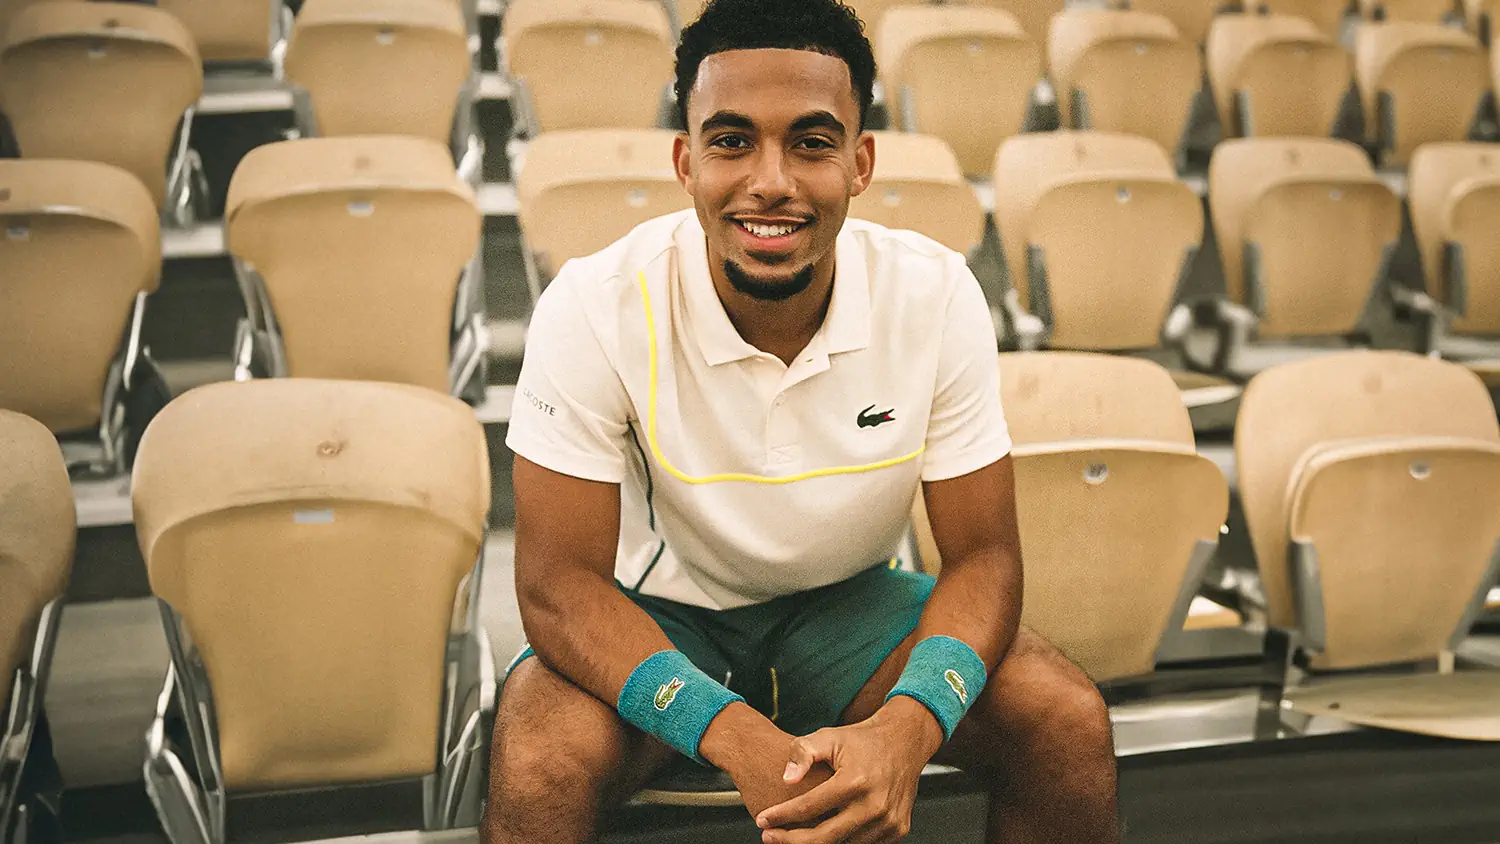 Lacoste appoints French tennis player Arthur Fils as new brand ambassador